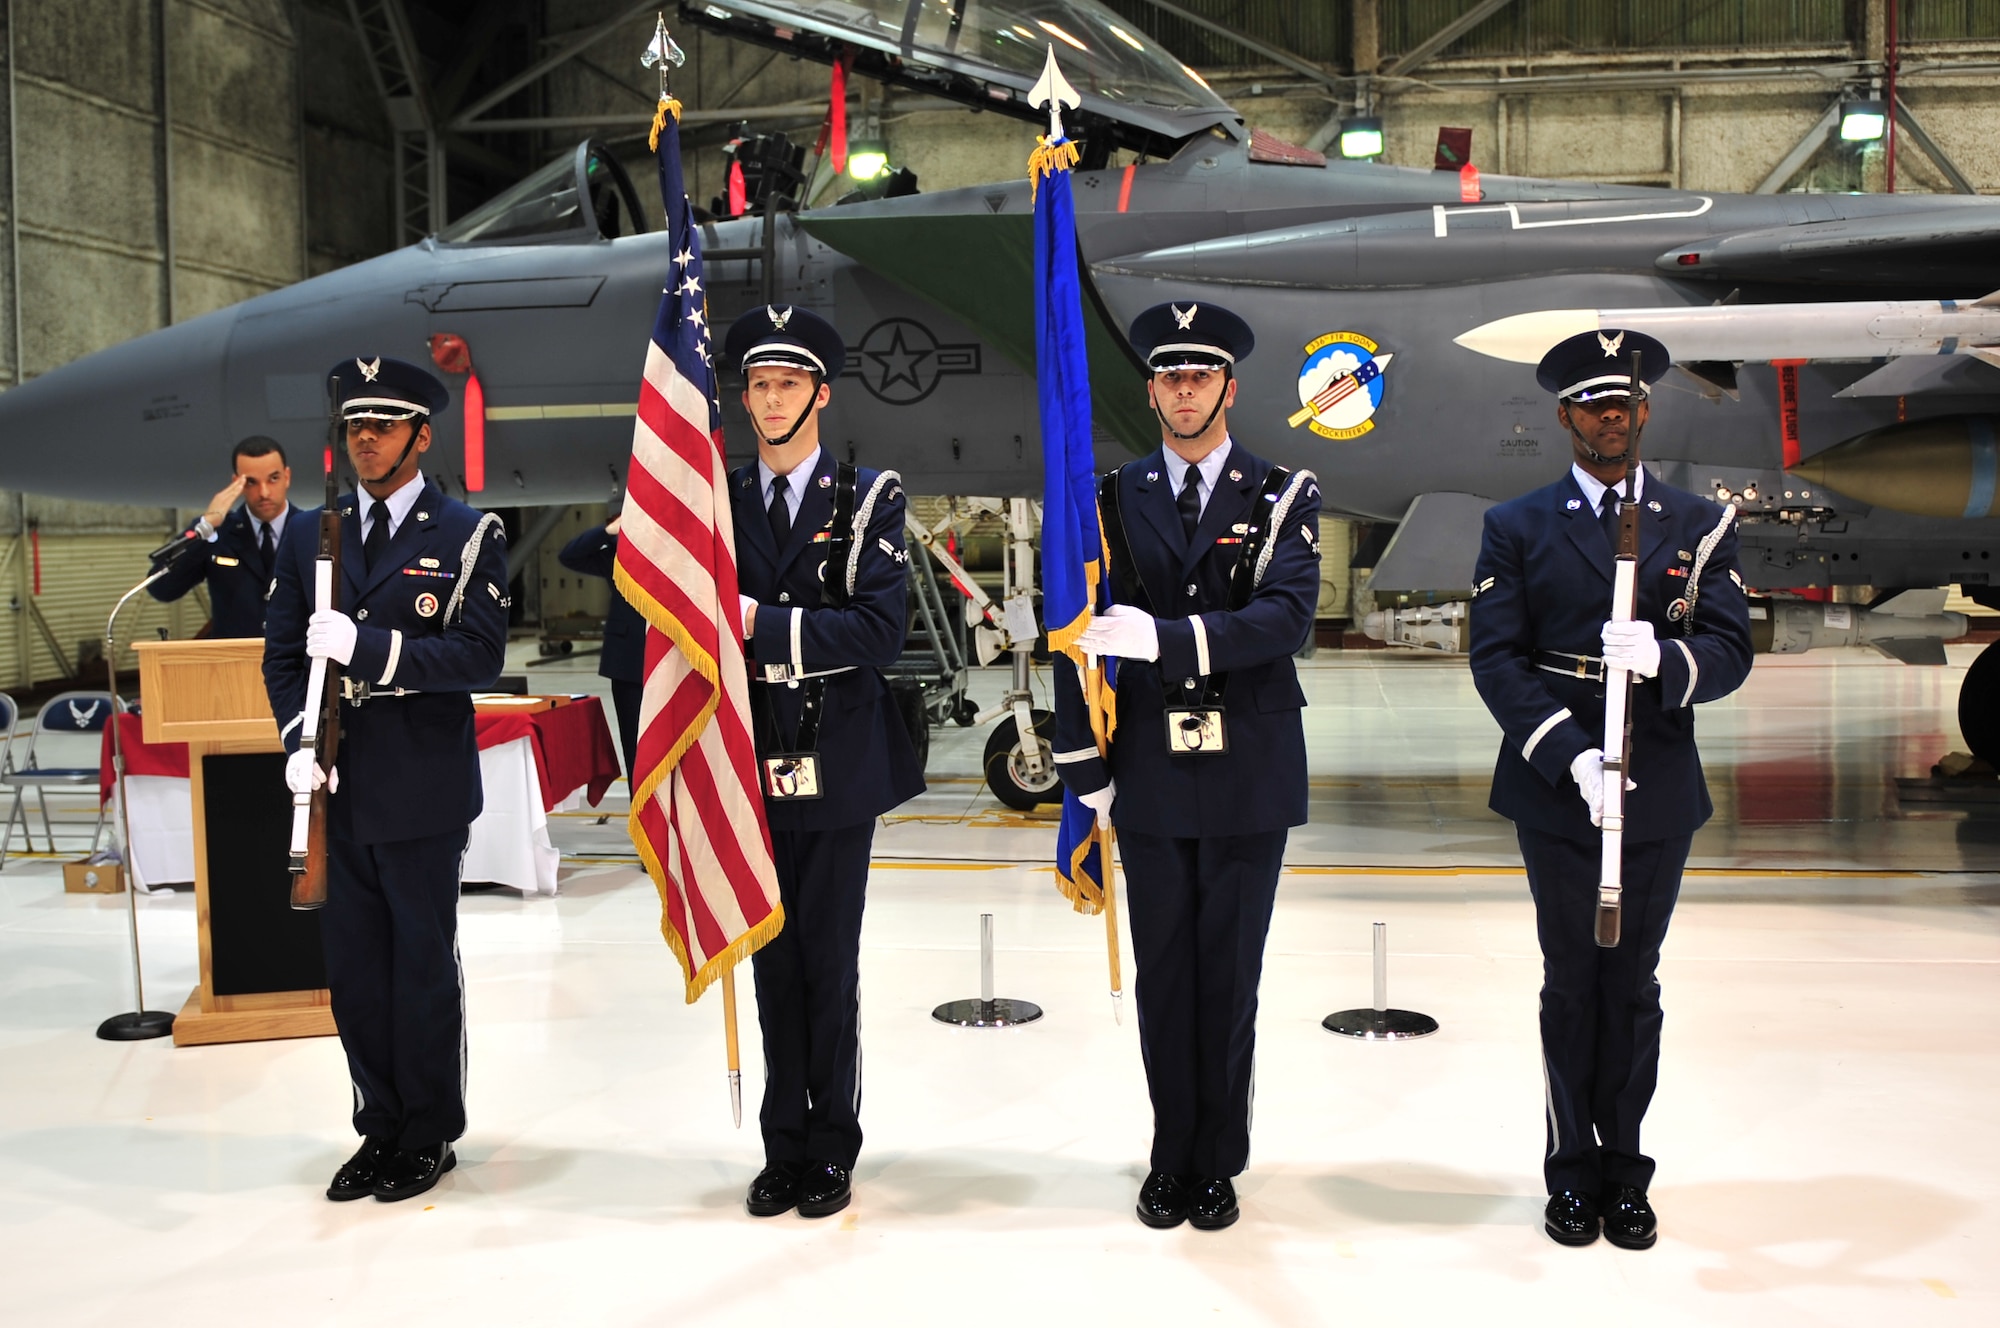 Airmen from the 4th Fighter Wing Honor Guard present “The Colors” during a retirement ceremony for Senior Master Sgt. Arthur Griffenkranz Jr., formerly from the 4th Operations Support Squadron, on Seymour Johnson Air Force Base, N.C., Feb. 5, 2010. Honor Guard Airmen serve as the face of their base representing the Air Force community and its traditions to servicemembers, their families and civilians alike during times of joy and sorrow. (U.S. Air Force photo/Senior Airman Rae Perry